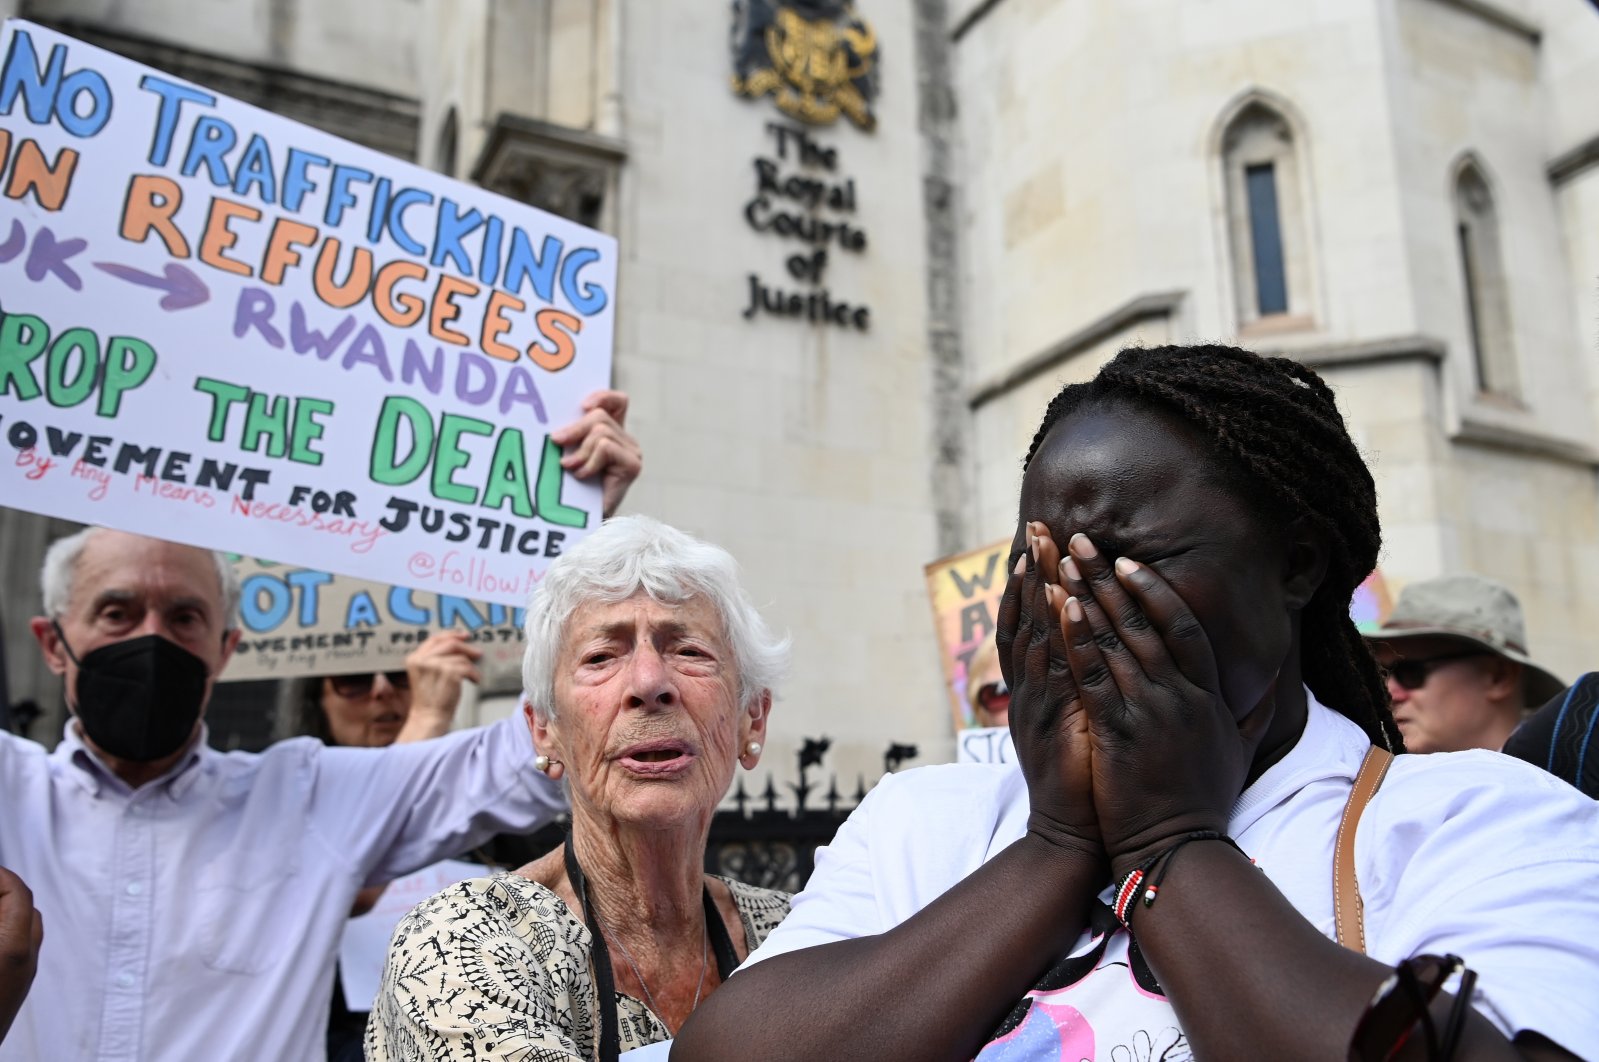 Human rights campaigners react after losing an appeal outside the High Court in London, Britain, June 13, 2022. (EPA)